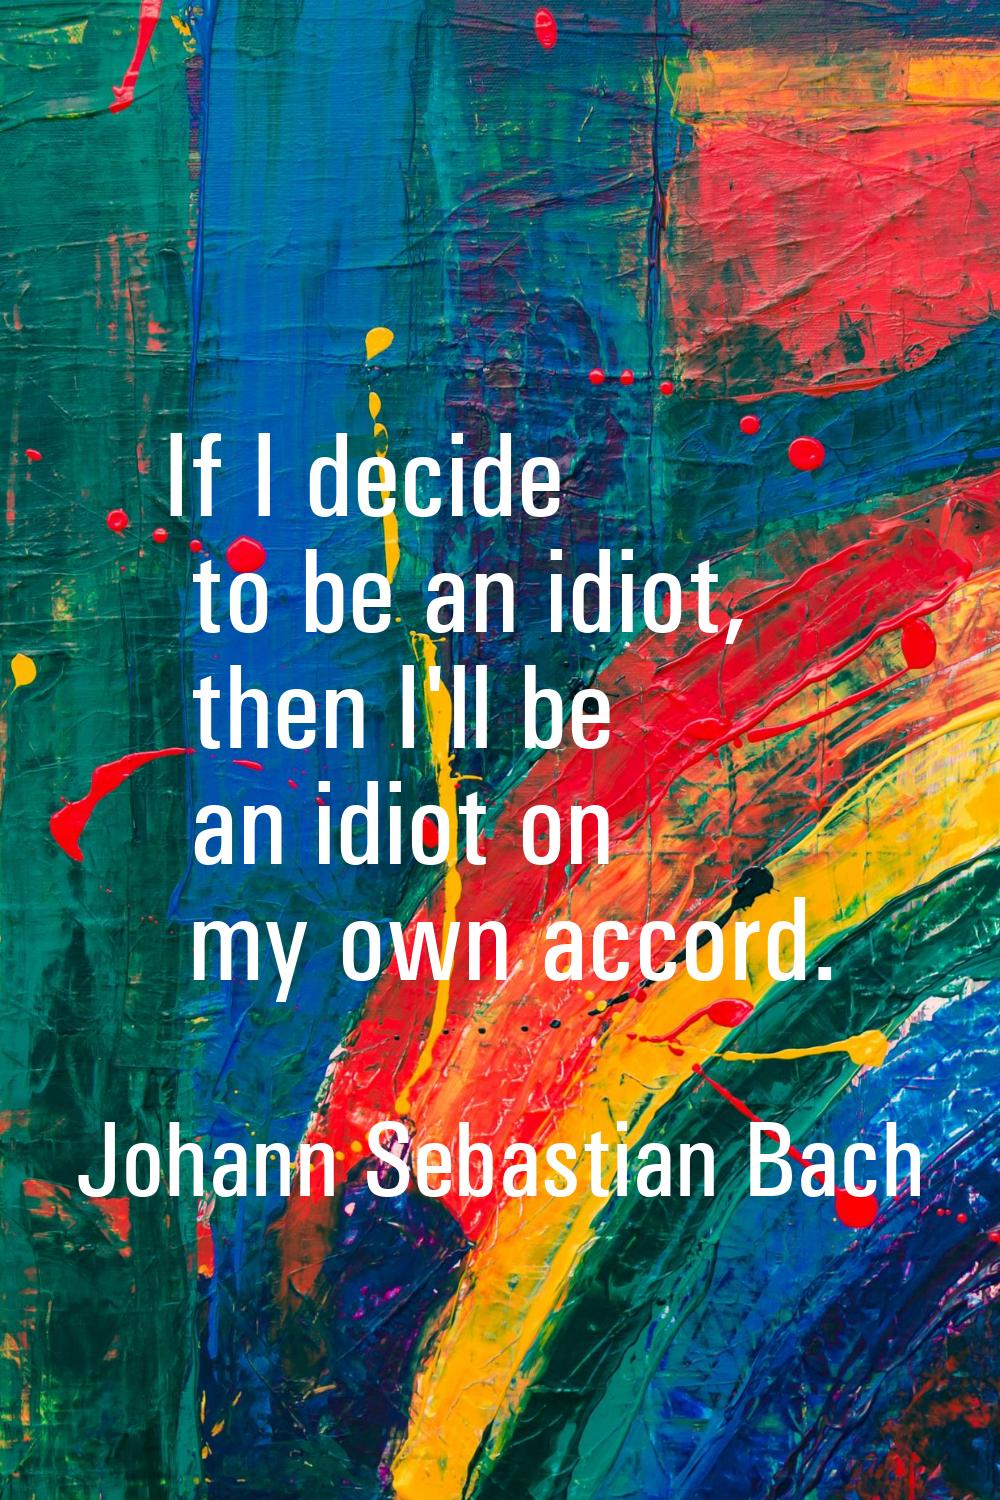 If I decide to be an idiot, then I'll be an idiot on my own accord.